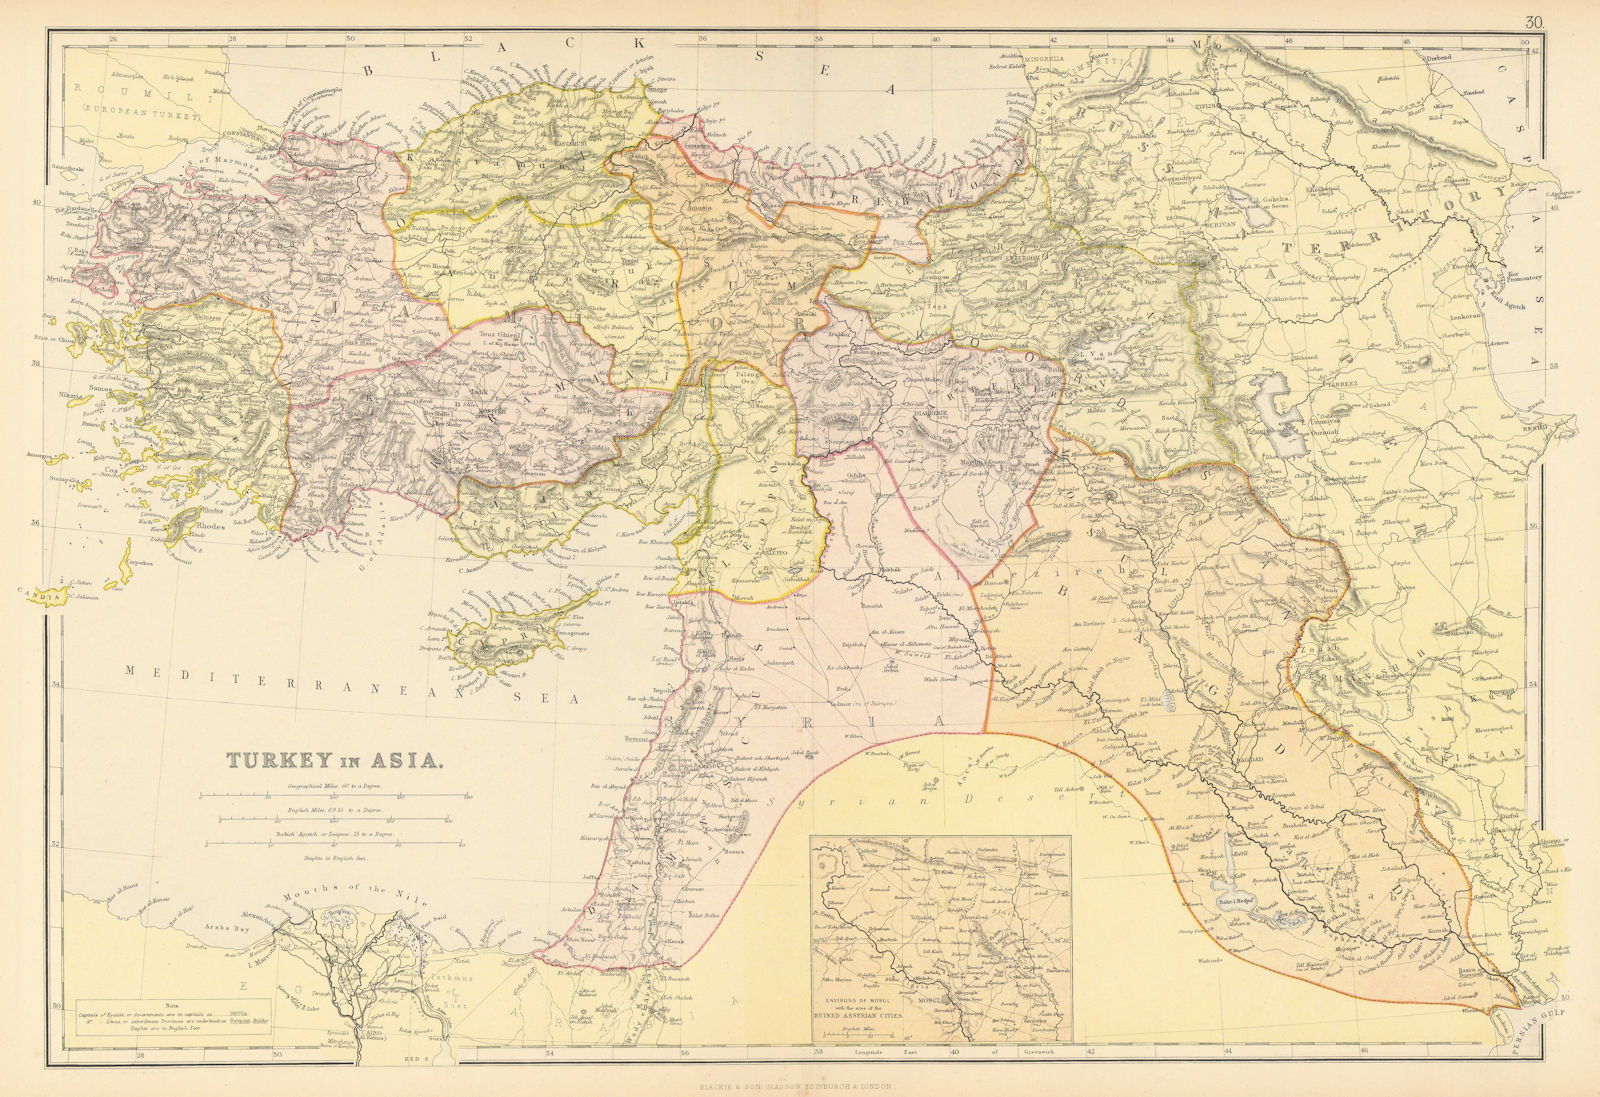 TURKEY IN ASIA. Scale in Agatch. Levant. Assyrian Cities. Eyalets Liwas 1886 map